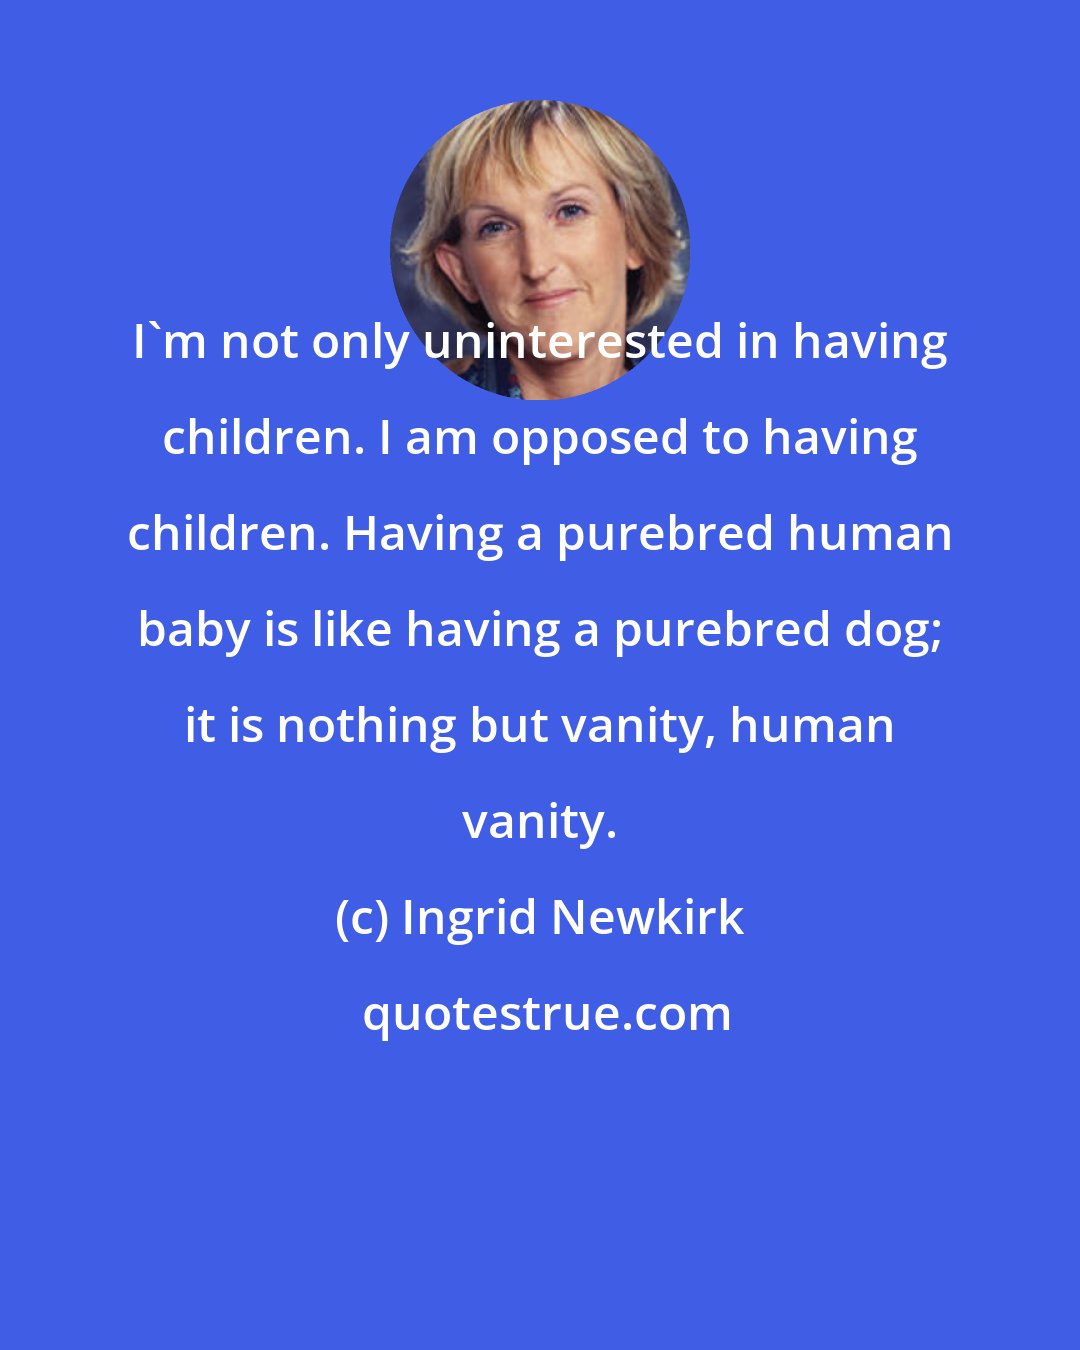 Ingrid Newkirk: I'm not only uninterested in having children. I am opposed to having children. Having a purebred human baby is like having a purebred dog; it is nothing but vanity, human vanity.